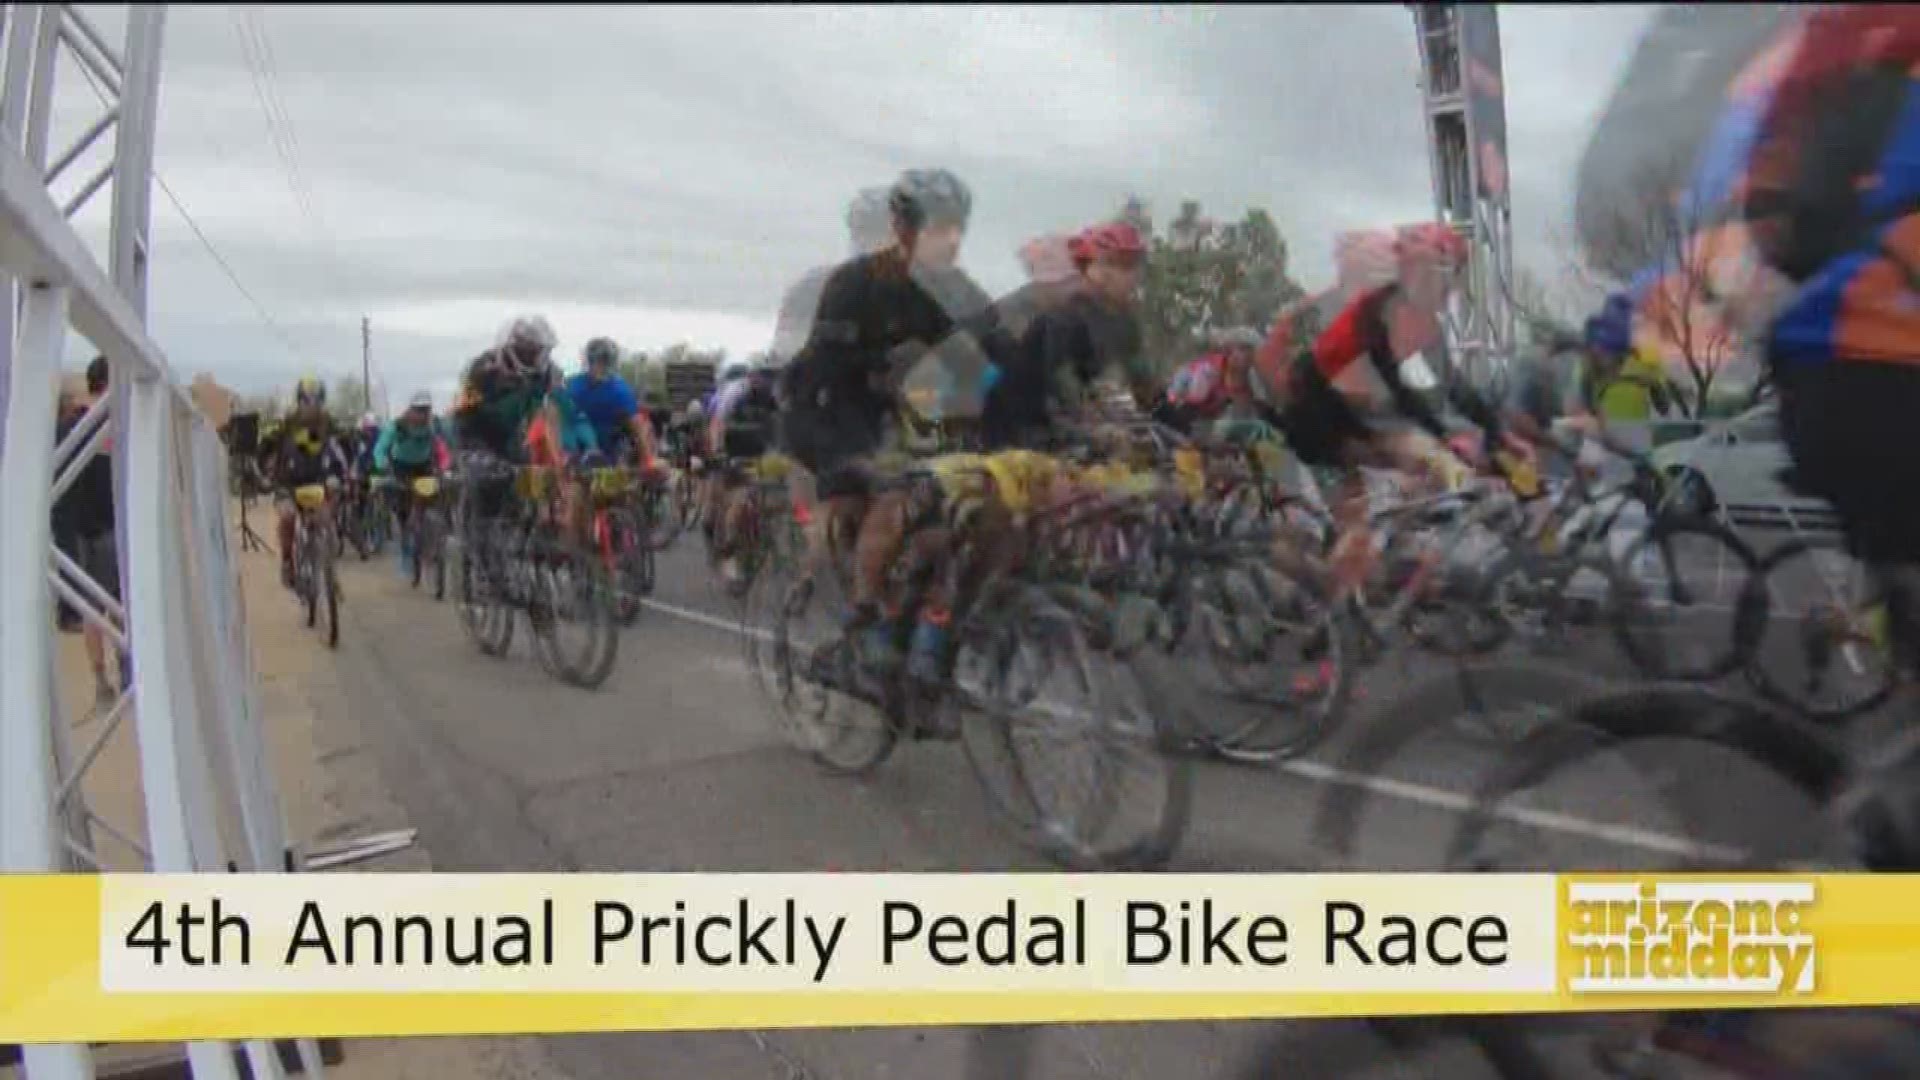 Mountain Biker Erin Huck tells us what's in store for this year's Prickly Pedal Race and how new bikers can try out the sport.